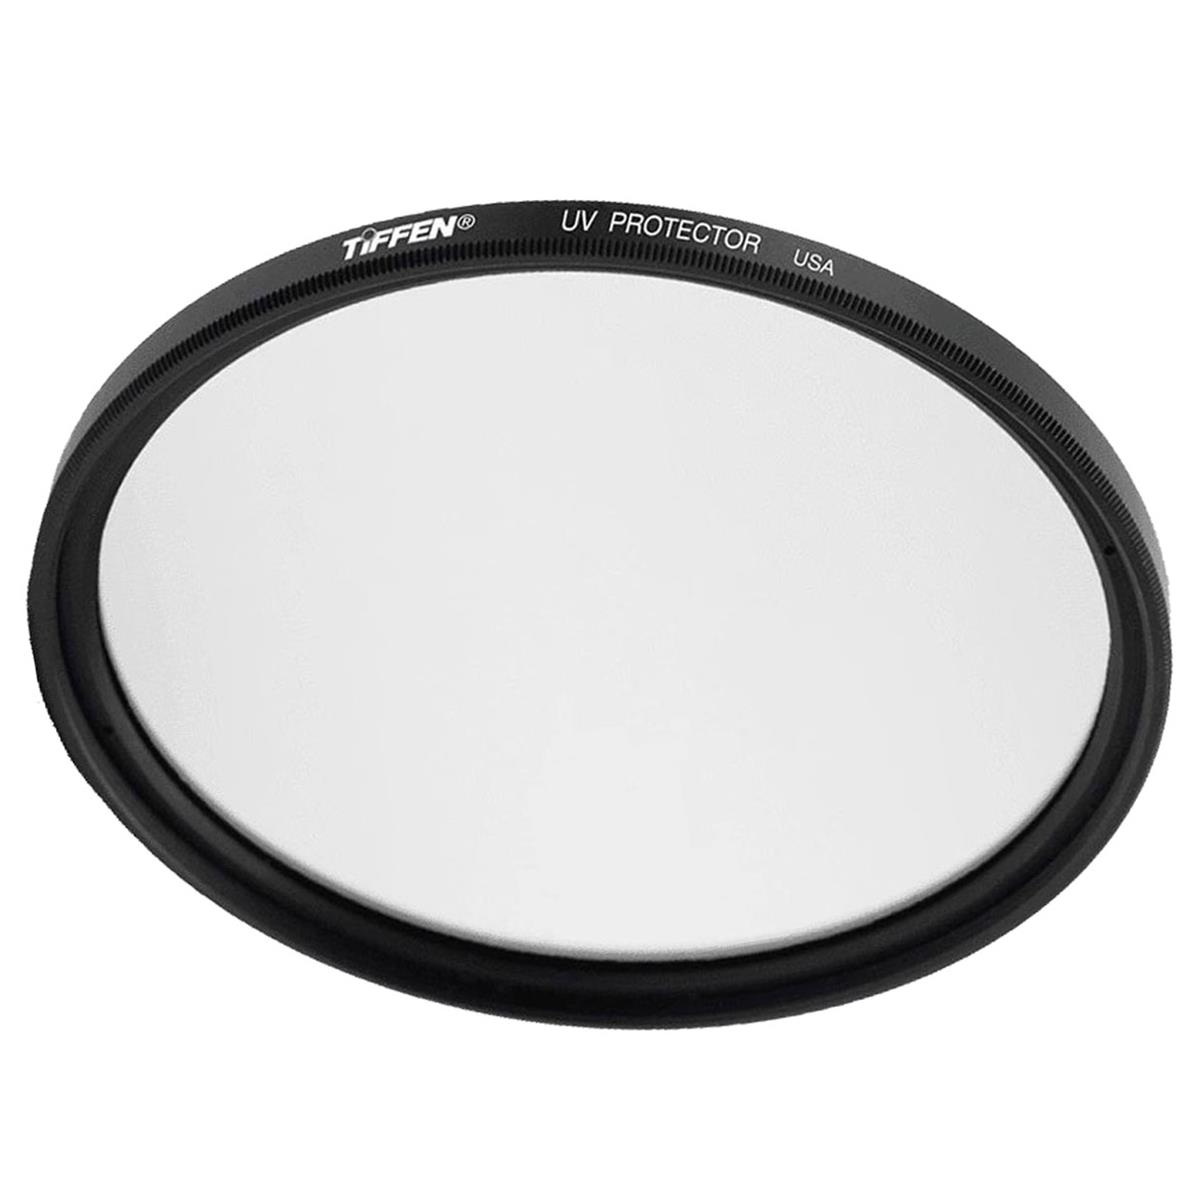 Tiffen 77mm UV Filter camera effect filter center field separation diopter filter 77mm produces blurry refraction photography filter